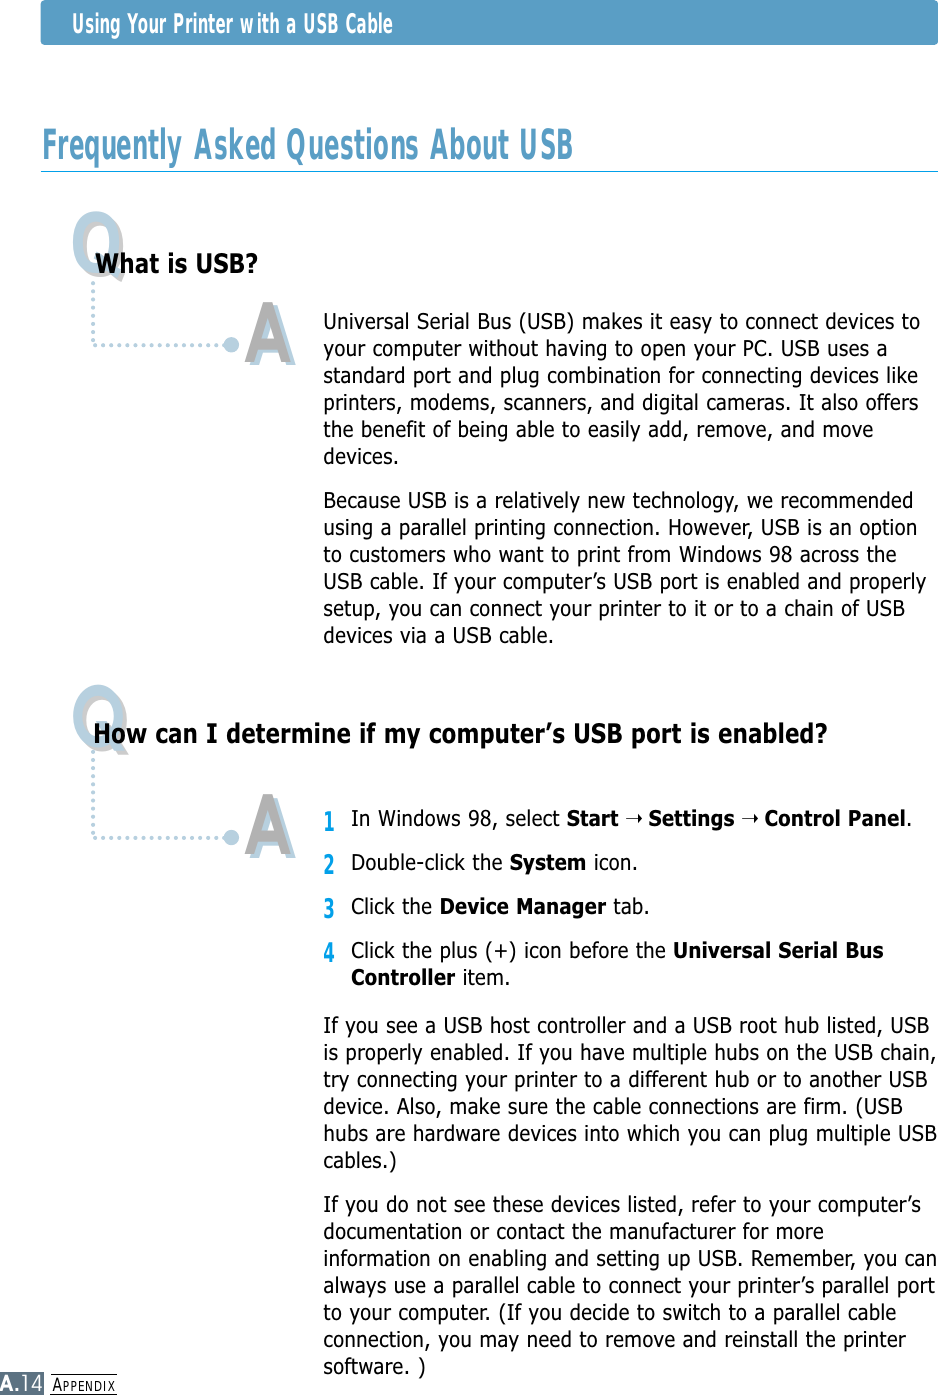 APPENDIXA.14Frequently Asked Questions About USBUsing Your Printer with a USB CableQQQQWhat is USB?How can I determine if my computer’s USB port is enabled?AAUniversal Serial Bus (USB) makes it easy to connect devices toyour computer without having to open your PC. USB uses astandard port and plug combination for connecting devices likeprinters, modems, scanners, and digital cameras. It also offersthe benefit of being able to easily add, remove, and movedevices.Because USB is a relatively new technology, we recommendedusing a parallel printing connection. However, USB is an optionto customers who want to print from Windows 98 across theUSB cable. If your computer’s USB port is enabled and properlysetup, you can connect your printer to it or to a chain of USBdevices via a USB cable.11In Windows 98, select Start ➝ Settings ➝ Control Panel.2Double-click the System icon.3Click the Device Manager tab.4Click the plus (+) icon before the Universal Serial BusController item.If you see a USB host controller and a USB root hub listed, USBis properly enabled. If you have multiple hubs on the USB chain,try connecting your printer to a different hub or to another USBdevice. Also, make sure the cable connections are firm. (USBhubs are hardware devices into which you can plug multiple USBcables.)If you do not see these devices listed, refer to your computer’sdocumentation or contact the manufacturer for moreinformation on enabling and setting up USB. Remember, you canalways use a parallel cable to connect your printer’s parallel portto your computer. (If you decide to switch to a parallel cableconnection, you may need to remove and reinstall the printersoftware. )AA